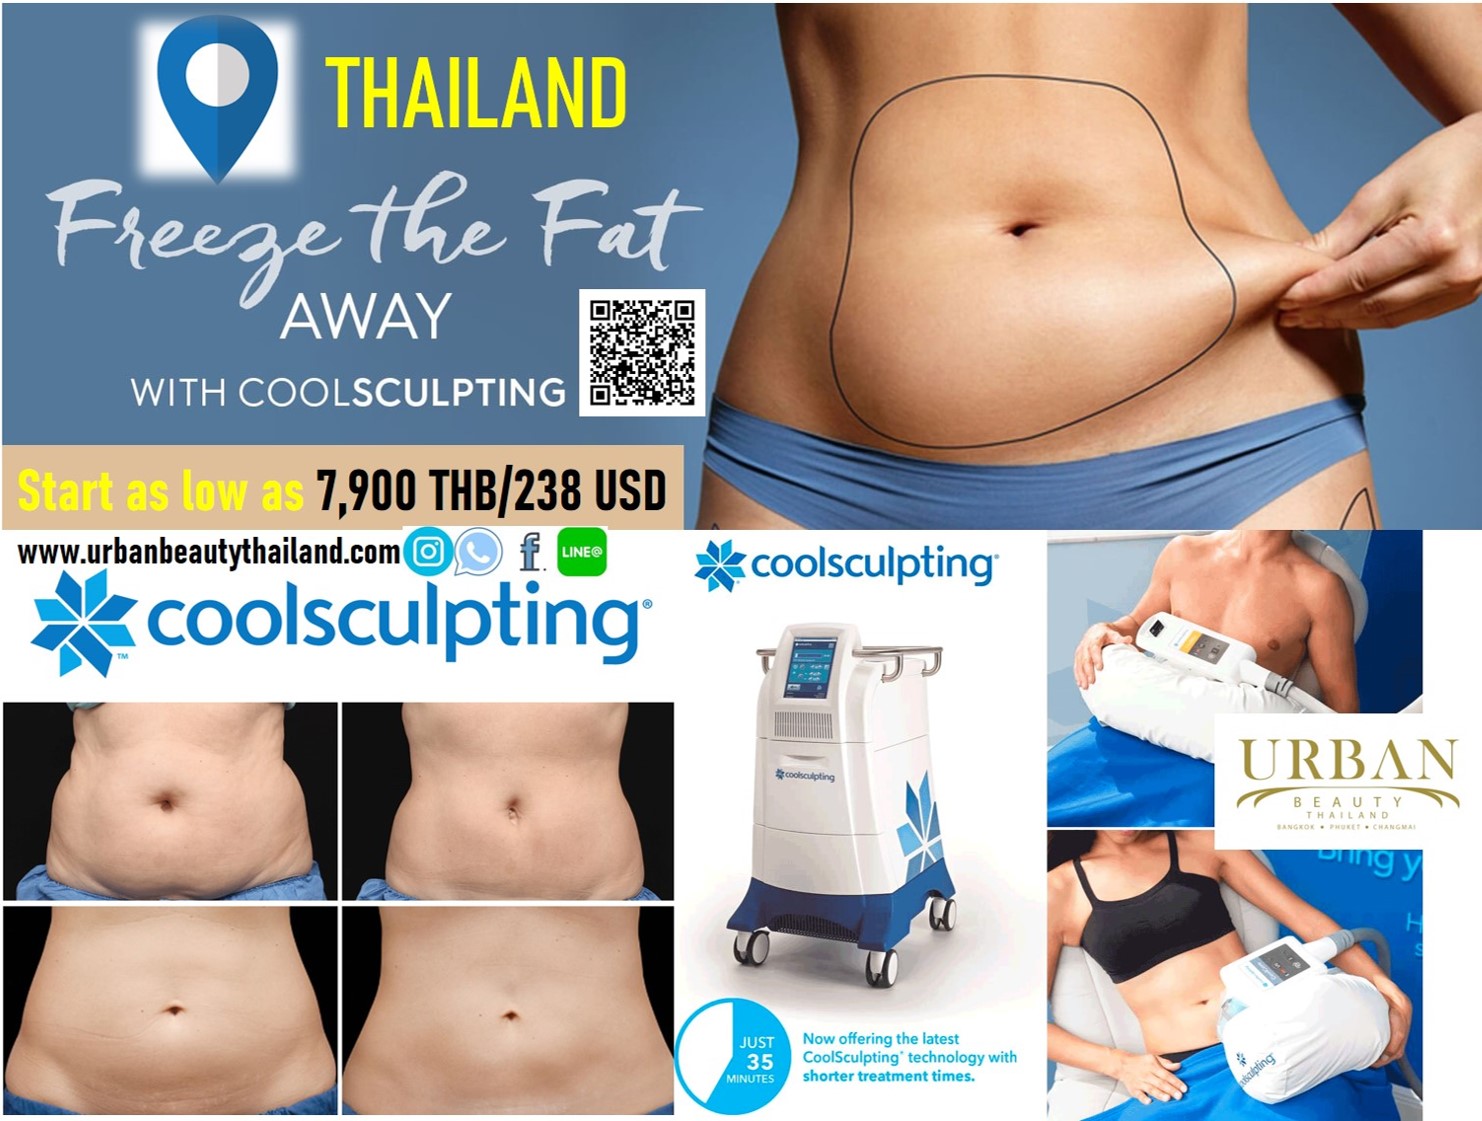 Get the Best Body Contouring Near Me At The Lowest Price.